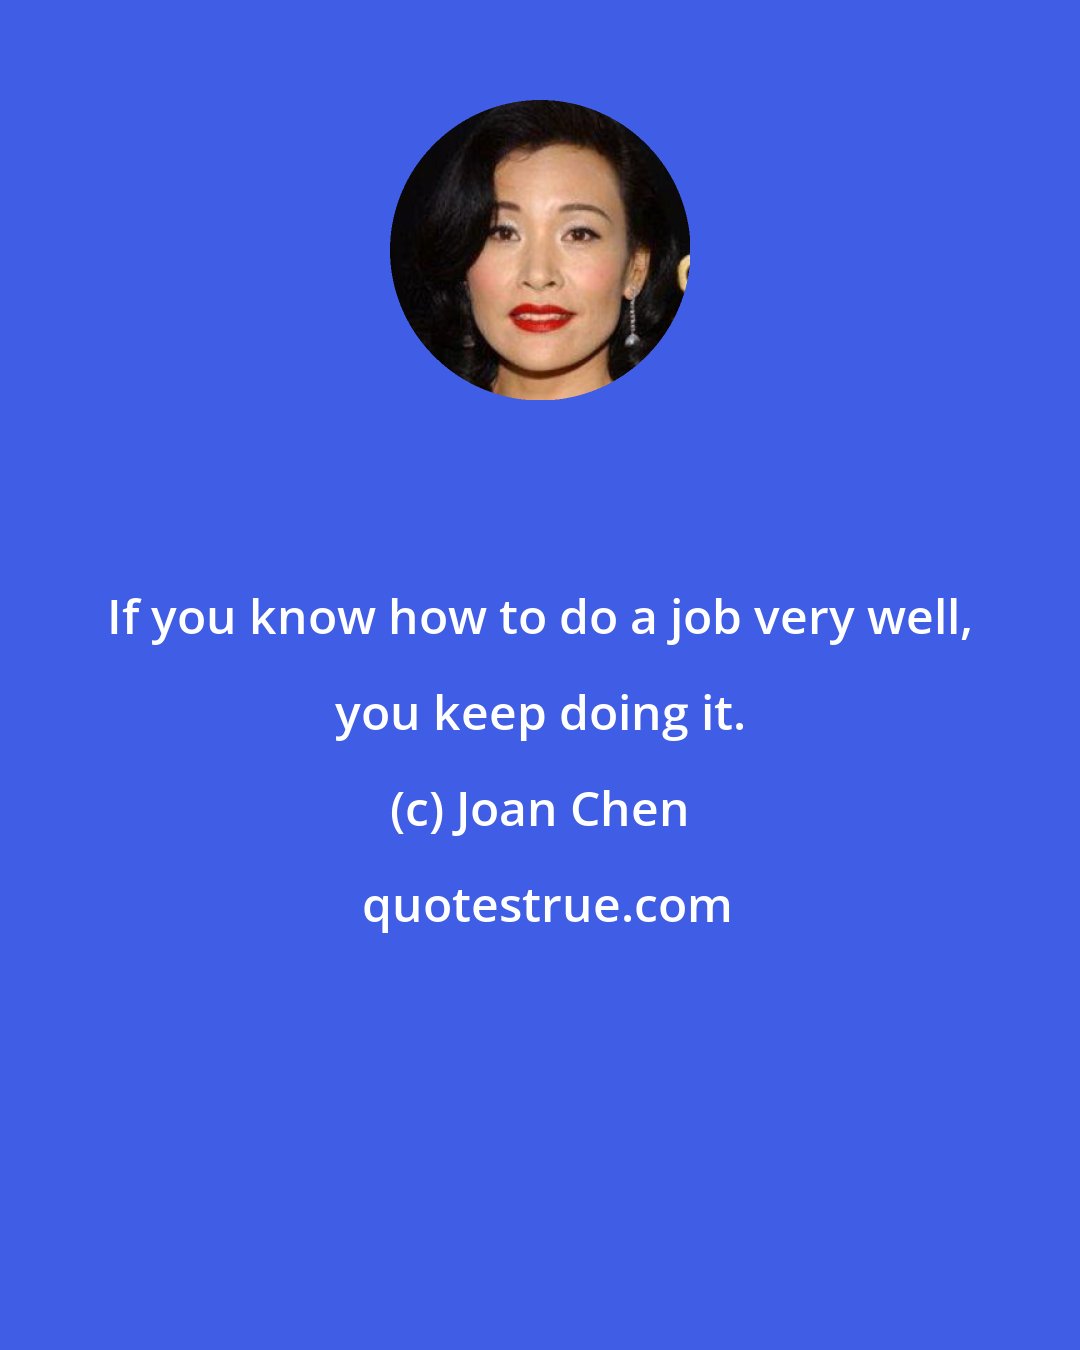 Joan Chen: If you know how to do a job very well, you keep doing it.